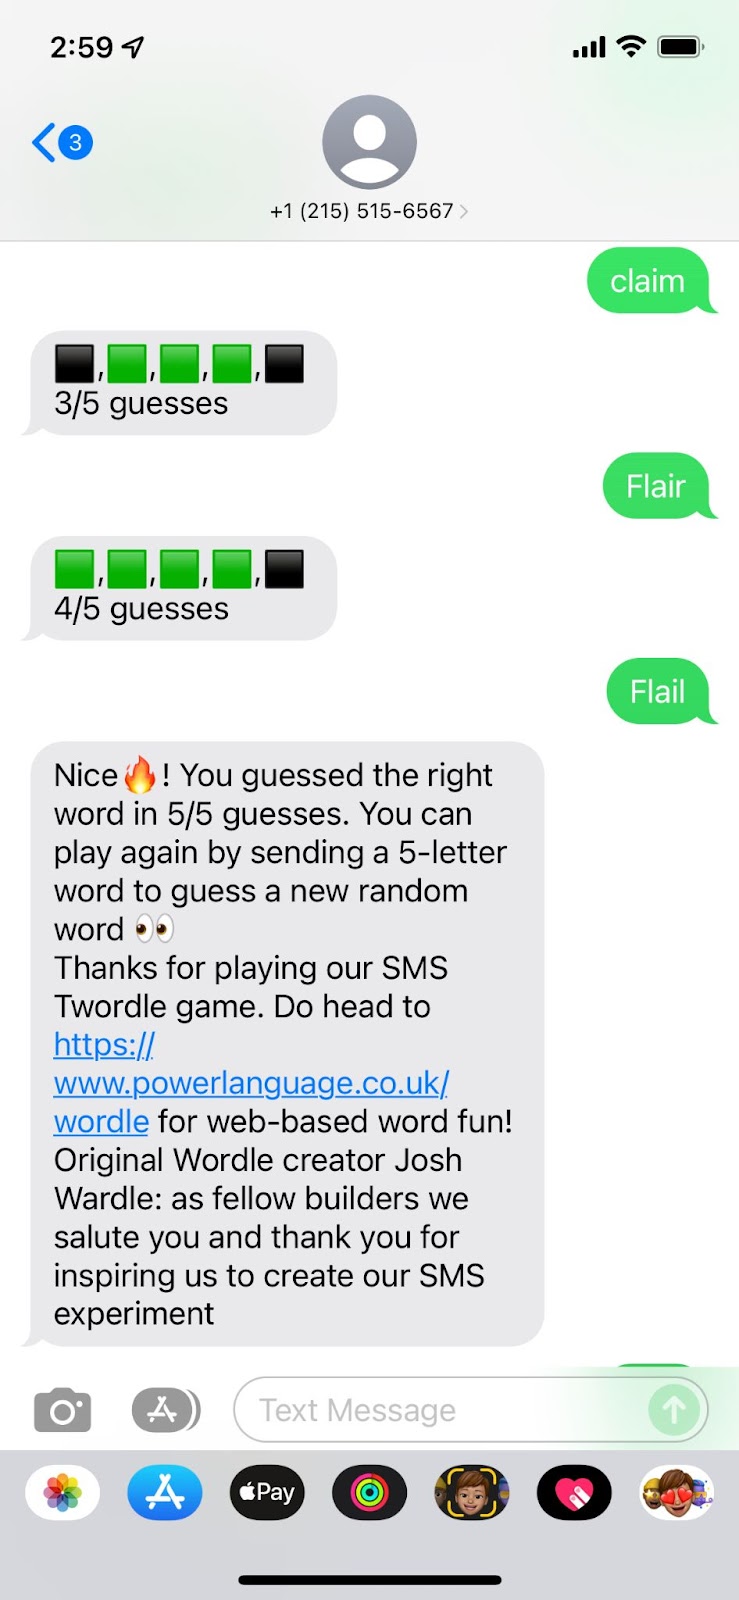 SMS conversation with the Twordle game phone number.